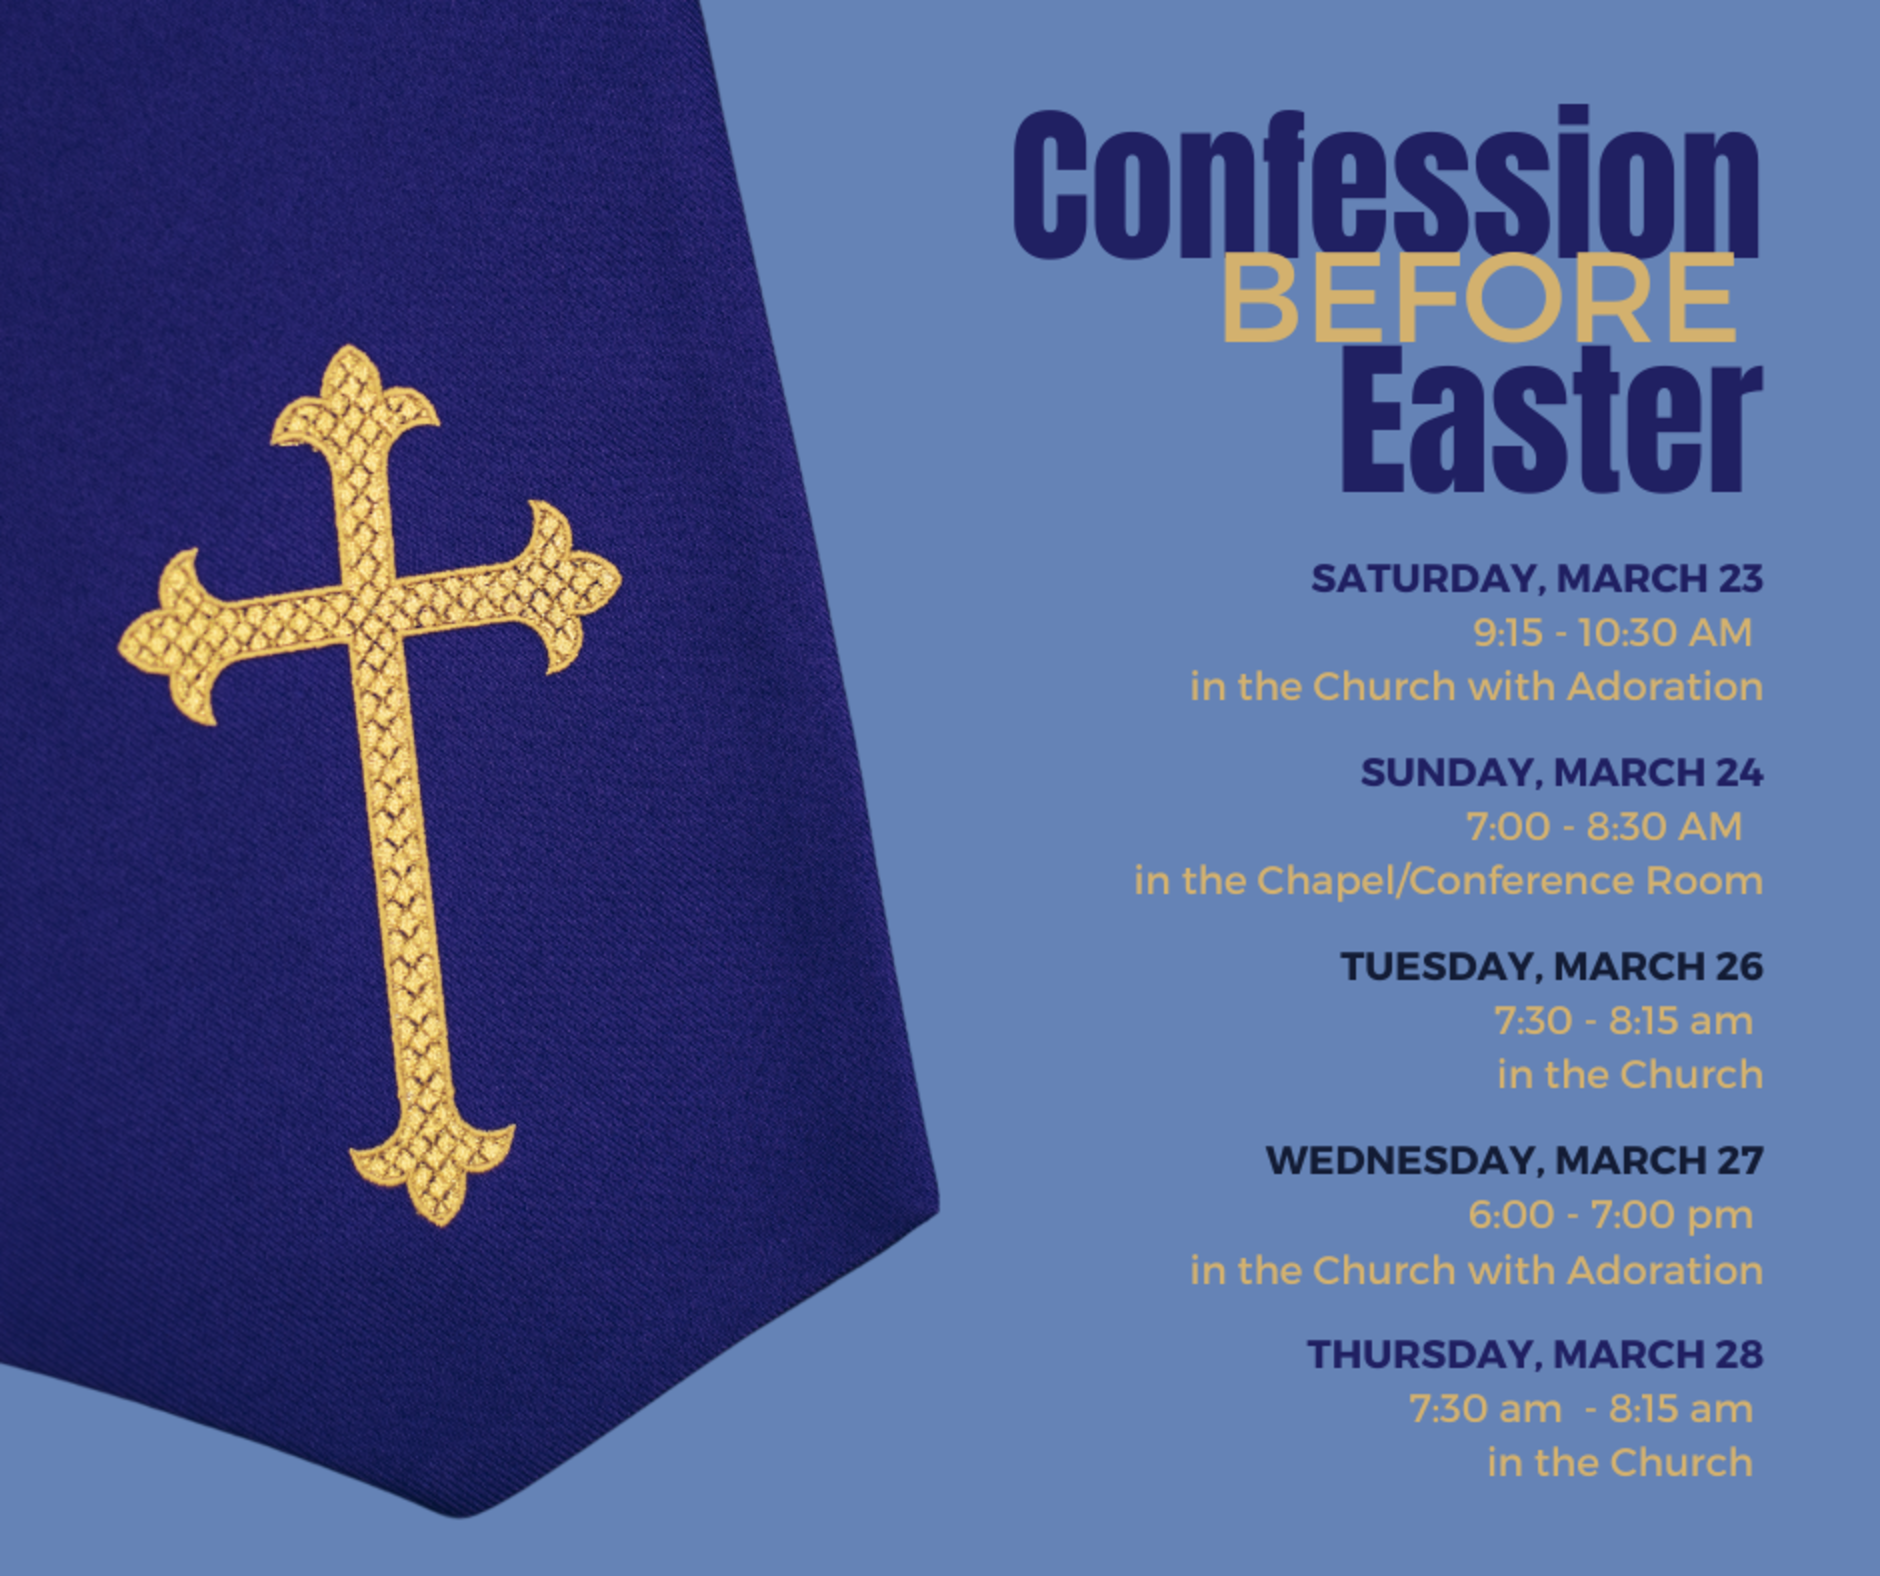 Confessio Before Easter